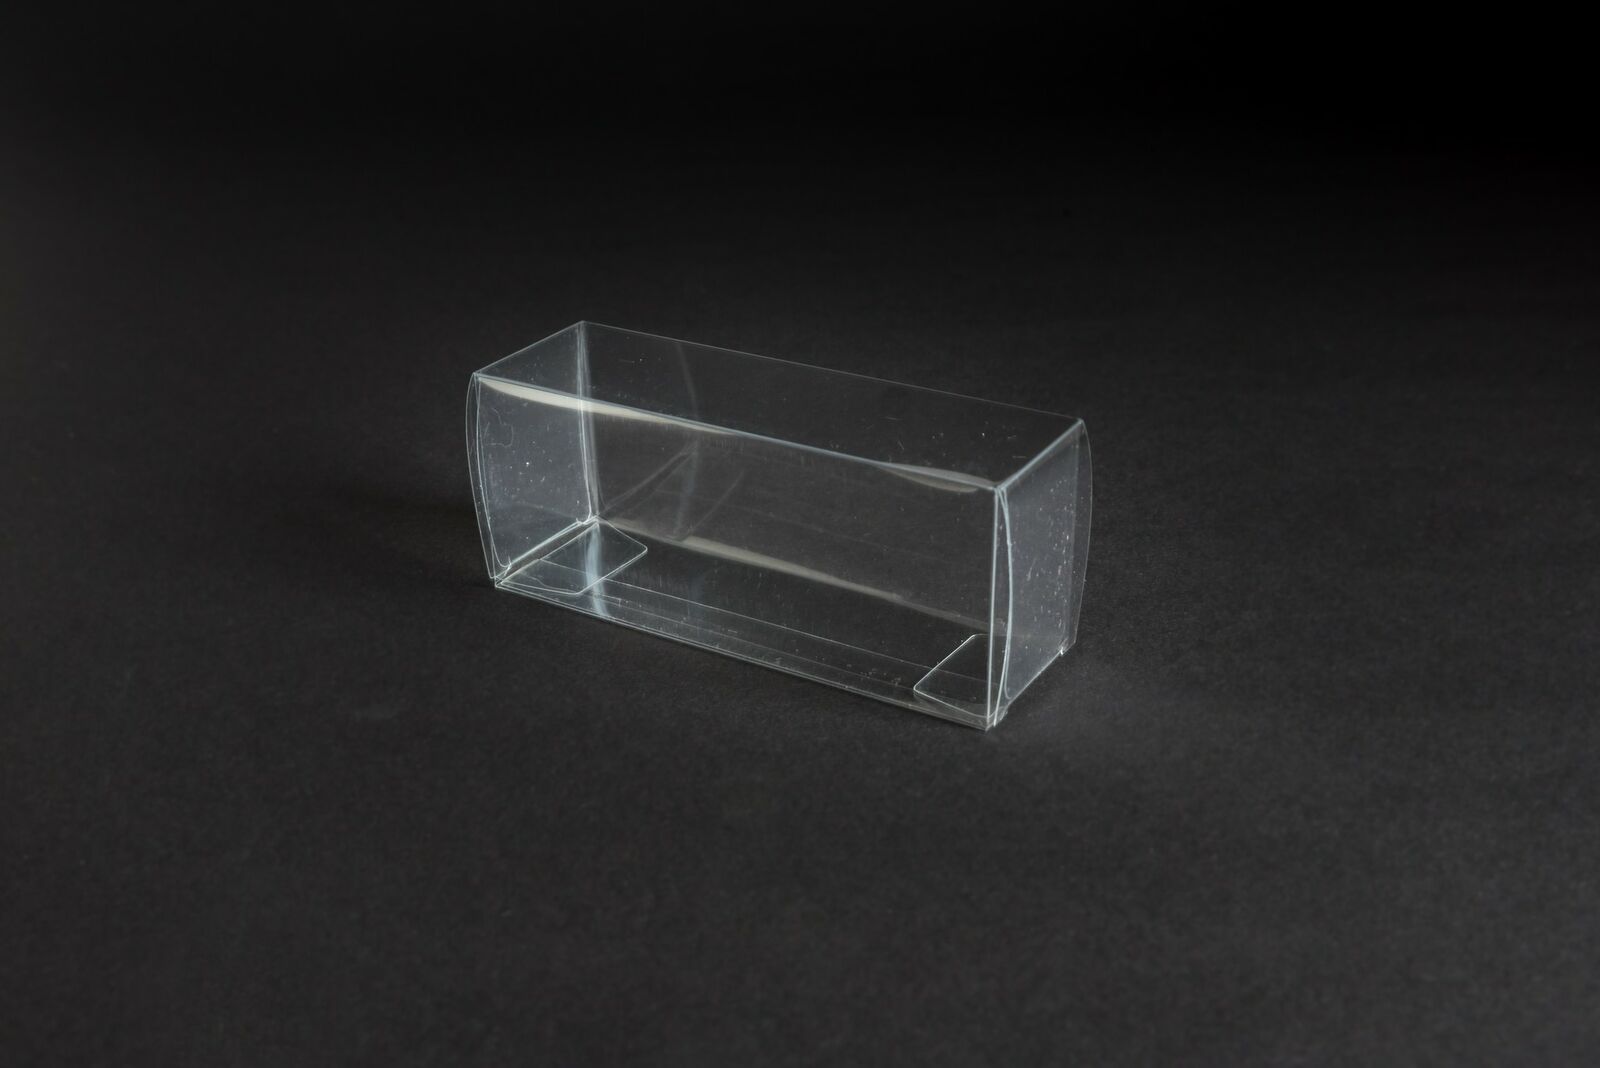 Transparent Packaging Folding Box For Model Railway N Scale - 3.94x0.98x1.38inch